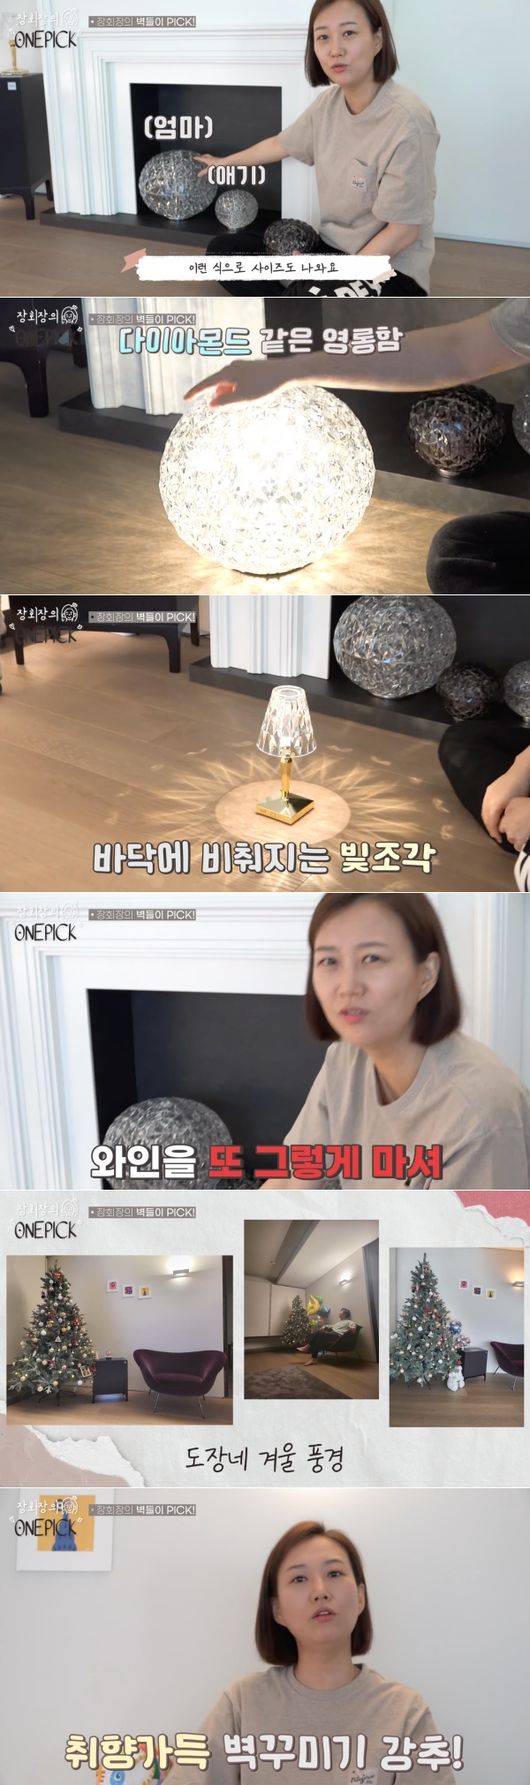 On the 25th, Jang Yun-jeong, Do Kyoung-wans YouTube channel Painting TV posted a video titled Chairmans decision and ransom?The released video featured a wall that Jang Yun-jeong had decorated with his own taste at the actual house; Jang Yun-jeong said, Its a wall that I love so much.I had a bookcase for the children. And I thought it was a house with children.Then I decorated it as a space for me, he said, explaining why he released the space he had decorated according to his taste.In fact, the space was harmoniously arranged with pechka, lighting, audio speakers and various City of London, reminiscent of a fireplace in a white background.Jang Yun-jeong explained the space concept, saying, I wanted to feel like a department store lobby or gallery.Among them, Jang Yun-jeongs favorite interiors props are pechika.Petchika, which is shaped like a fireplace but can not be lit, has a modern atmosphere with a black square centered on a white border.In response, Jang Yun-jeong said, The main of the Interiors, adding: I made a direct purchase; it took a long time to get it; more than a month.But the real thing was much better, he said, showing satisfaction with a smile that he could not hide.On one side of the Interiors wall was a horse doll like a childrens toy.About the doll reminiscent of the actual foal, Jang Yun-jeong said, Yeon Woo was a horse, so he gave birth to Yeon Woo and bought this.However, Ha Young-yi, not Yeon Woo, feeds, rides, speaks and plays well. Behind the doll was an expensive audio speaker.Jang Yun-jeong said, He is just here. He said that he was used like City of London for Interiors rather than real use.I left it like a set of squares of a fireplace. In winter, I explained that the tree was located instead of the speaker.In addition, the fireplace attracted attention to the interiors and lighting enthusiasts with their expensive lighting that only knew their name.Jang Yun-jeong laughed, saying, When you turn on the child at a dark table, the light spreads like a diamond, and you drink like that.In addition, Jang Yun-jeong introduced the elephant city of London and picture frames collected from department store galleries and pop-up stores.I think everyone has a lot of time at home these days so Im interested in Interiors, and its also good to decorate one wall as a space for me, he advised.Jang Yun-jeong married announcer Do Kyong-wan in 2013; the two had a son, Yeon Woo, and a daughter, Ha Youngs brother and sister.In particular, Jang Yun-jeong and Do Kyoung-wan families appeared on KBS 2TV entertainment program Superman Returns and received favorable reviews for their daily life.Painted TV YouTube screen.